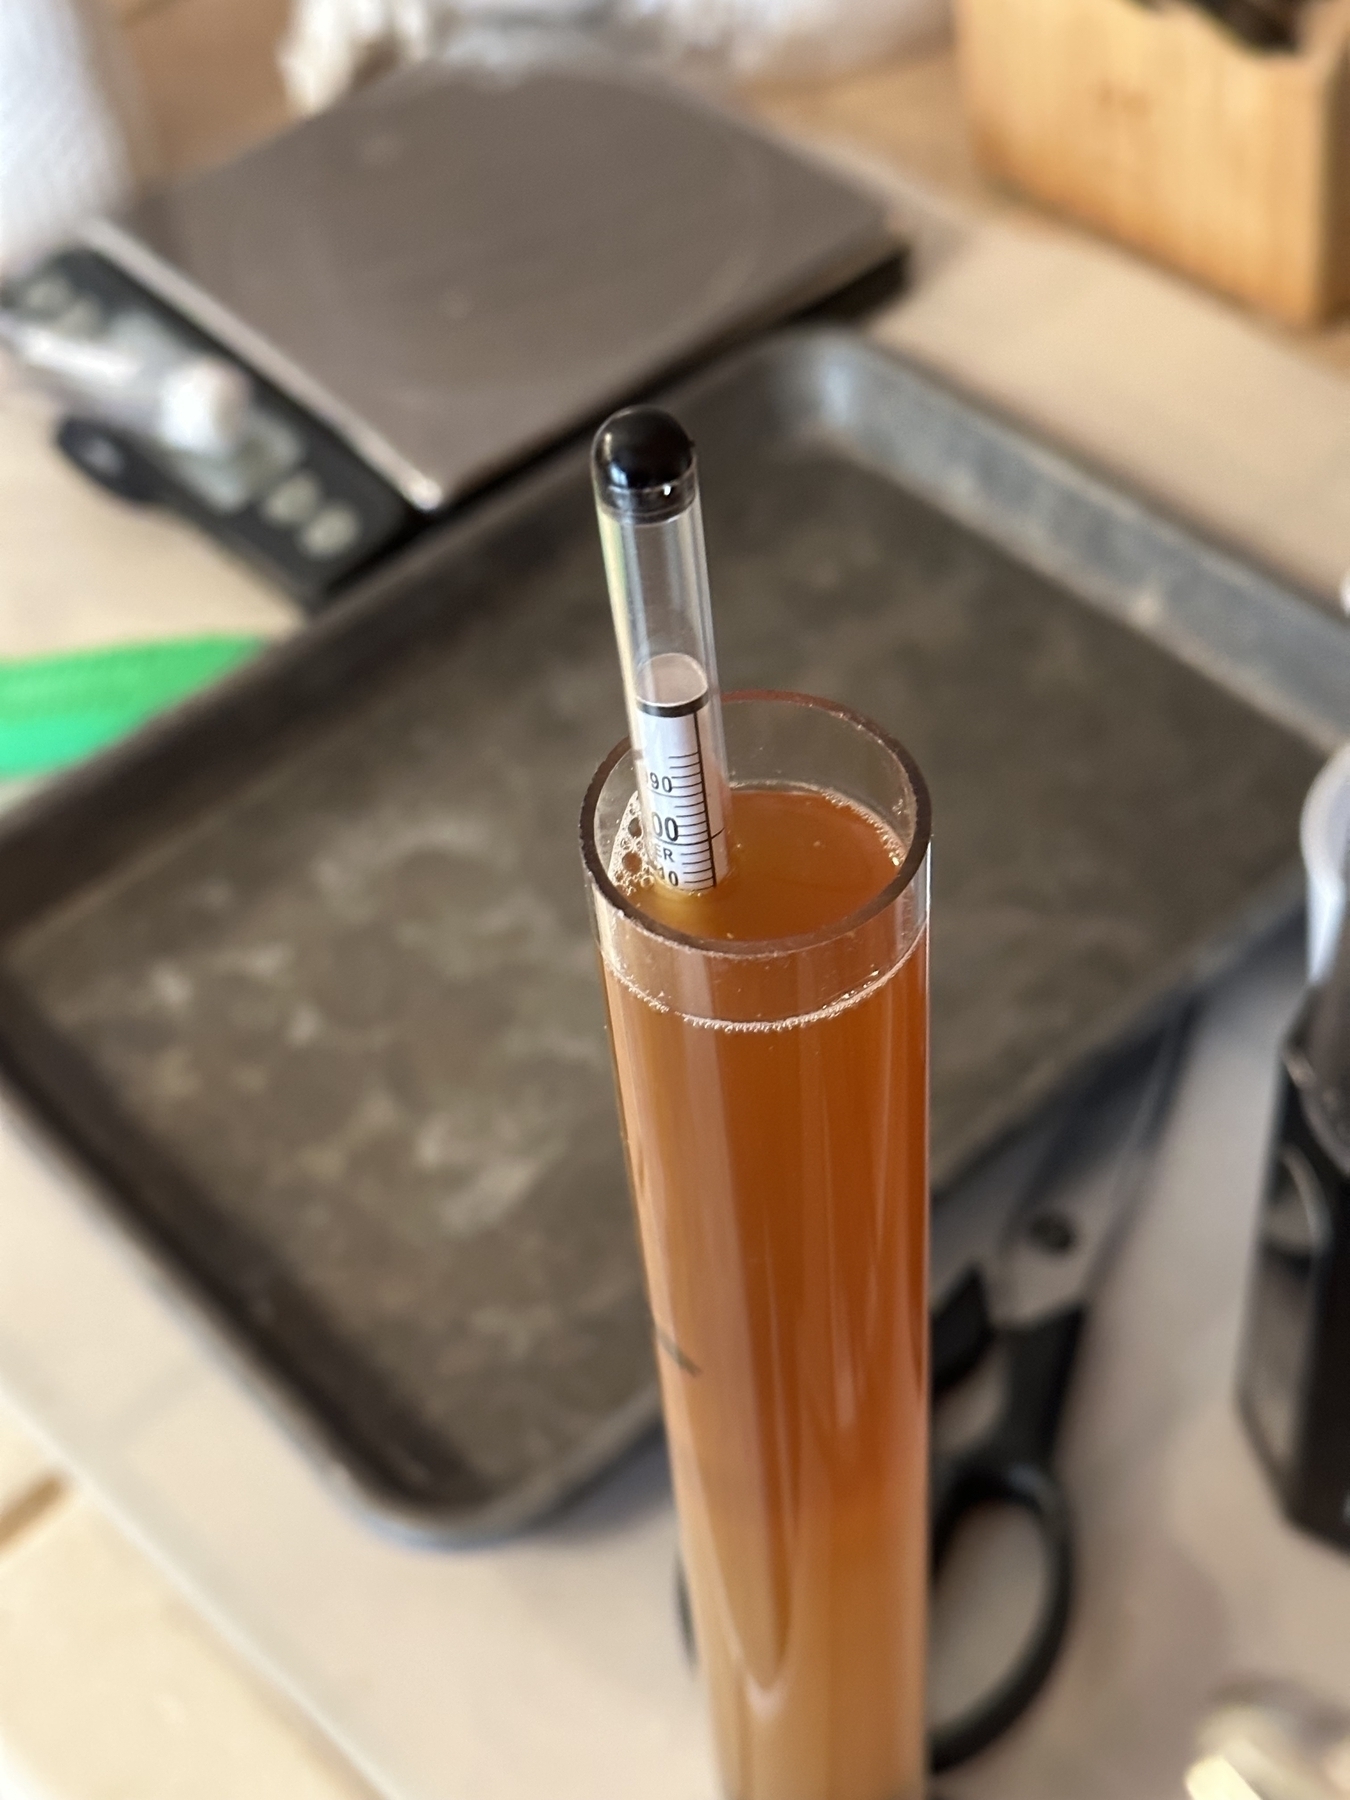 A gravity measuring device in a tube vessel with amber beer. The meniscus is at 1.010.